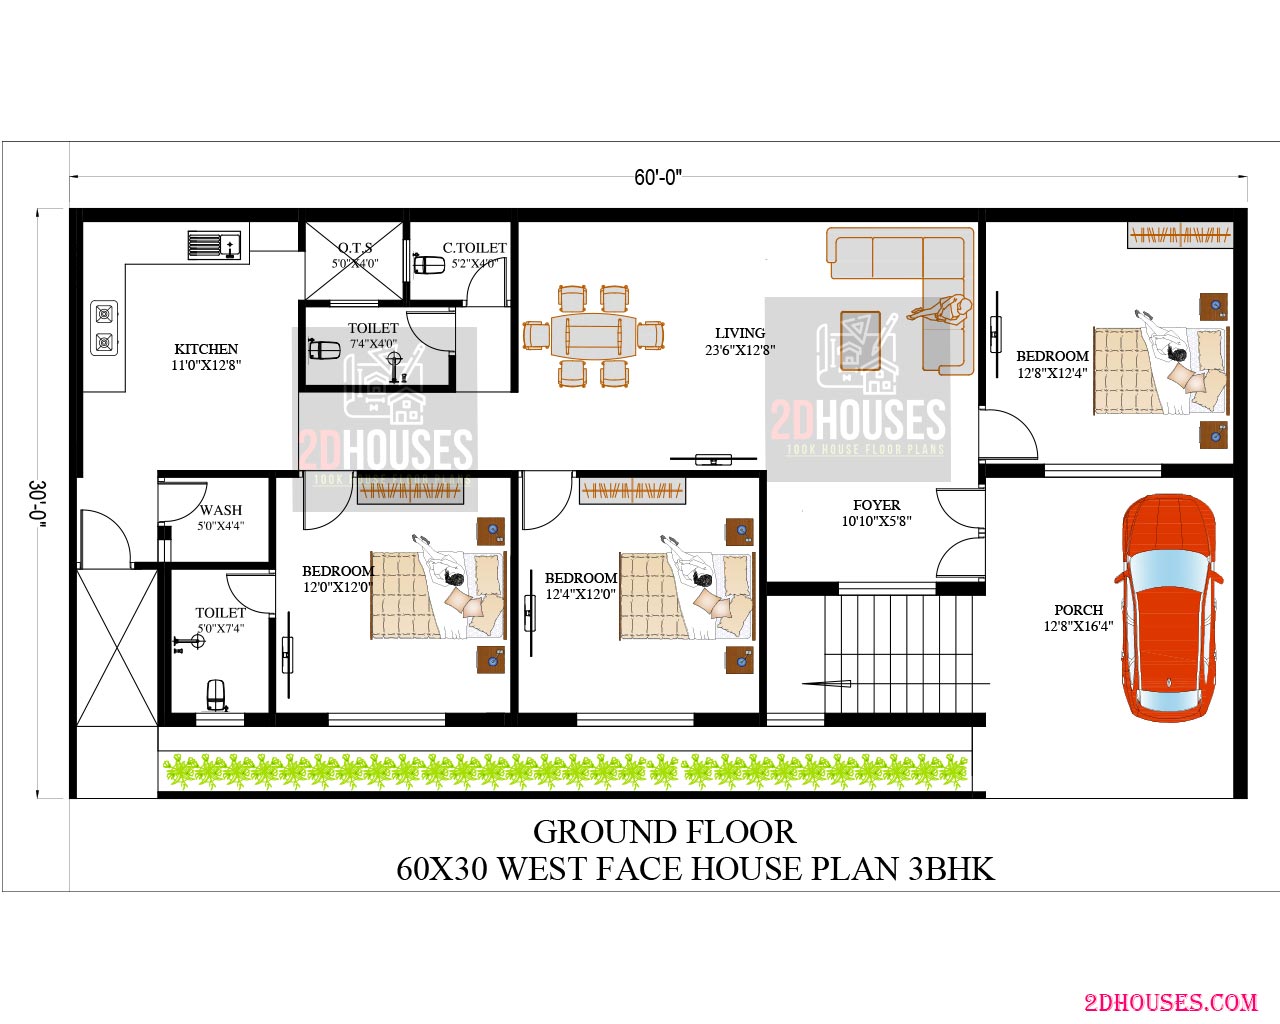 60 by 30 house design west facing 3bhk